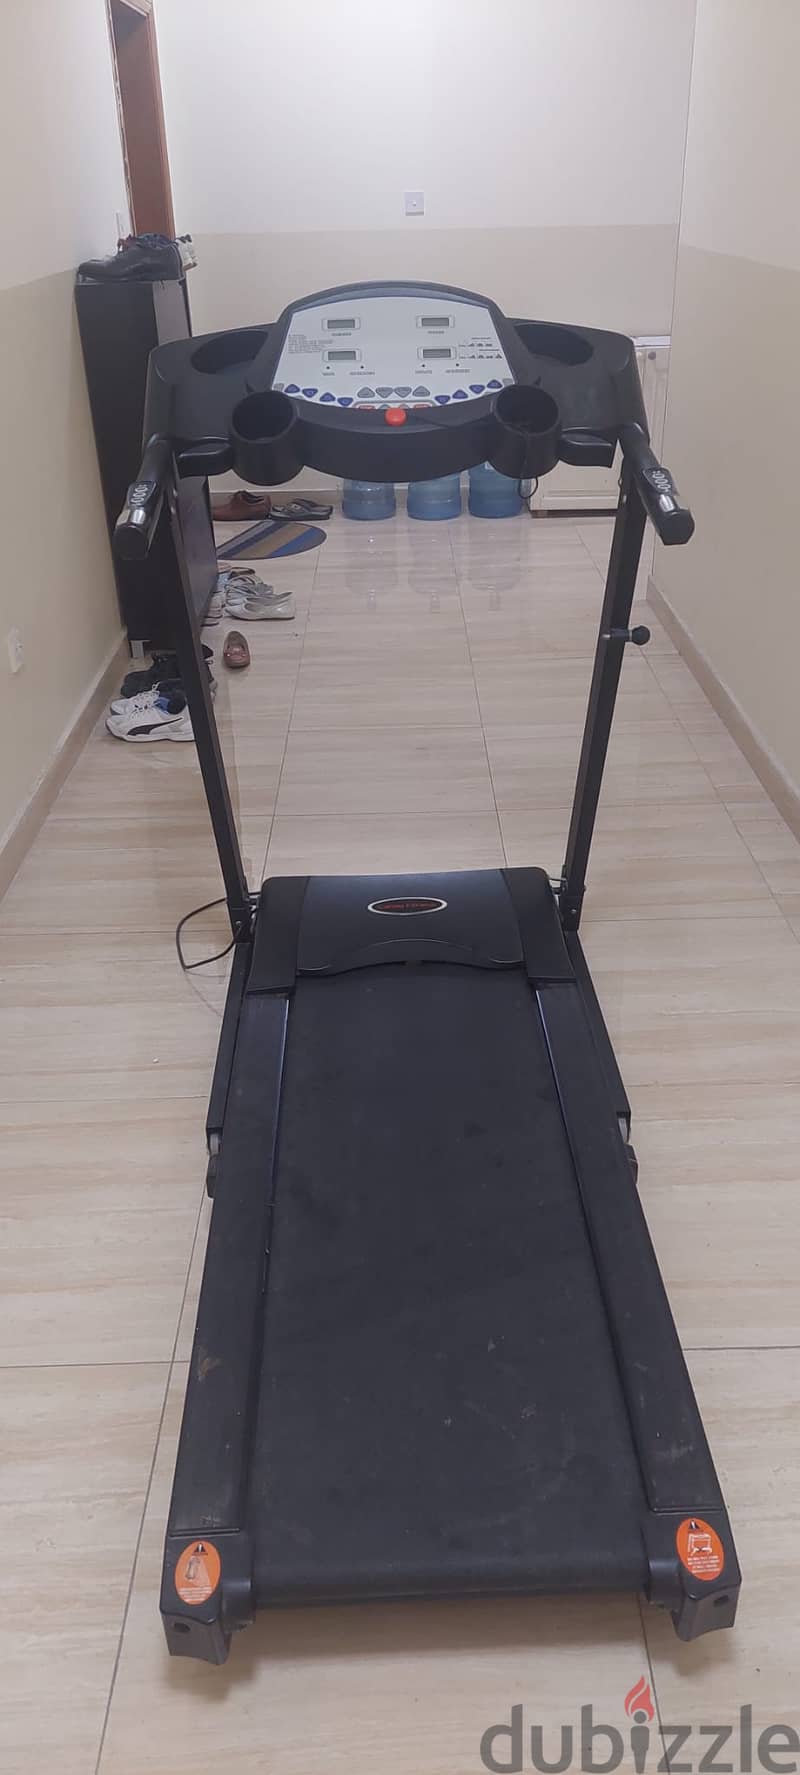 Tread Mill for sale : Made in Korea 1